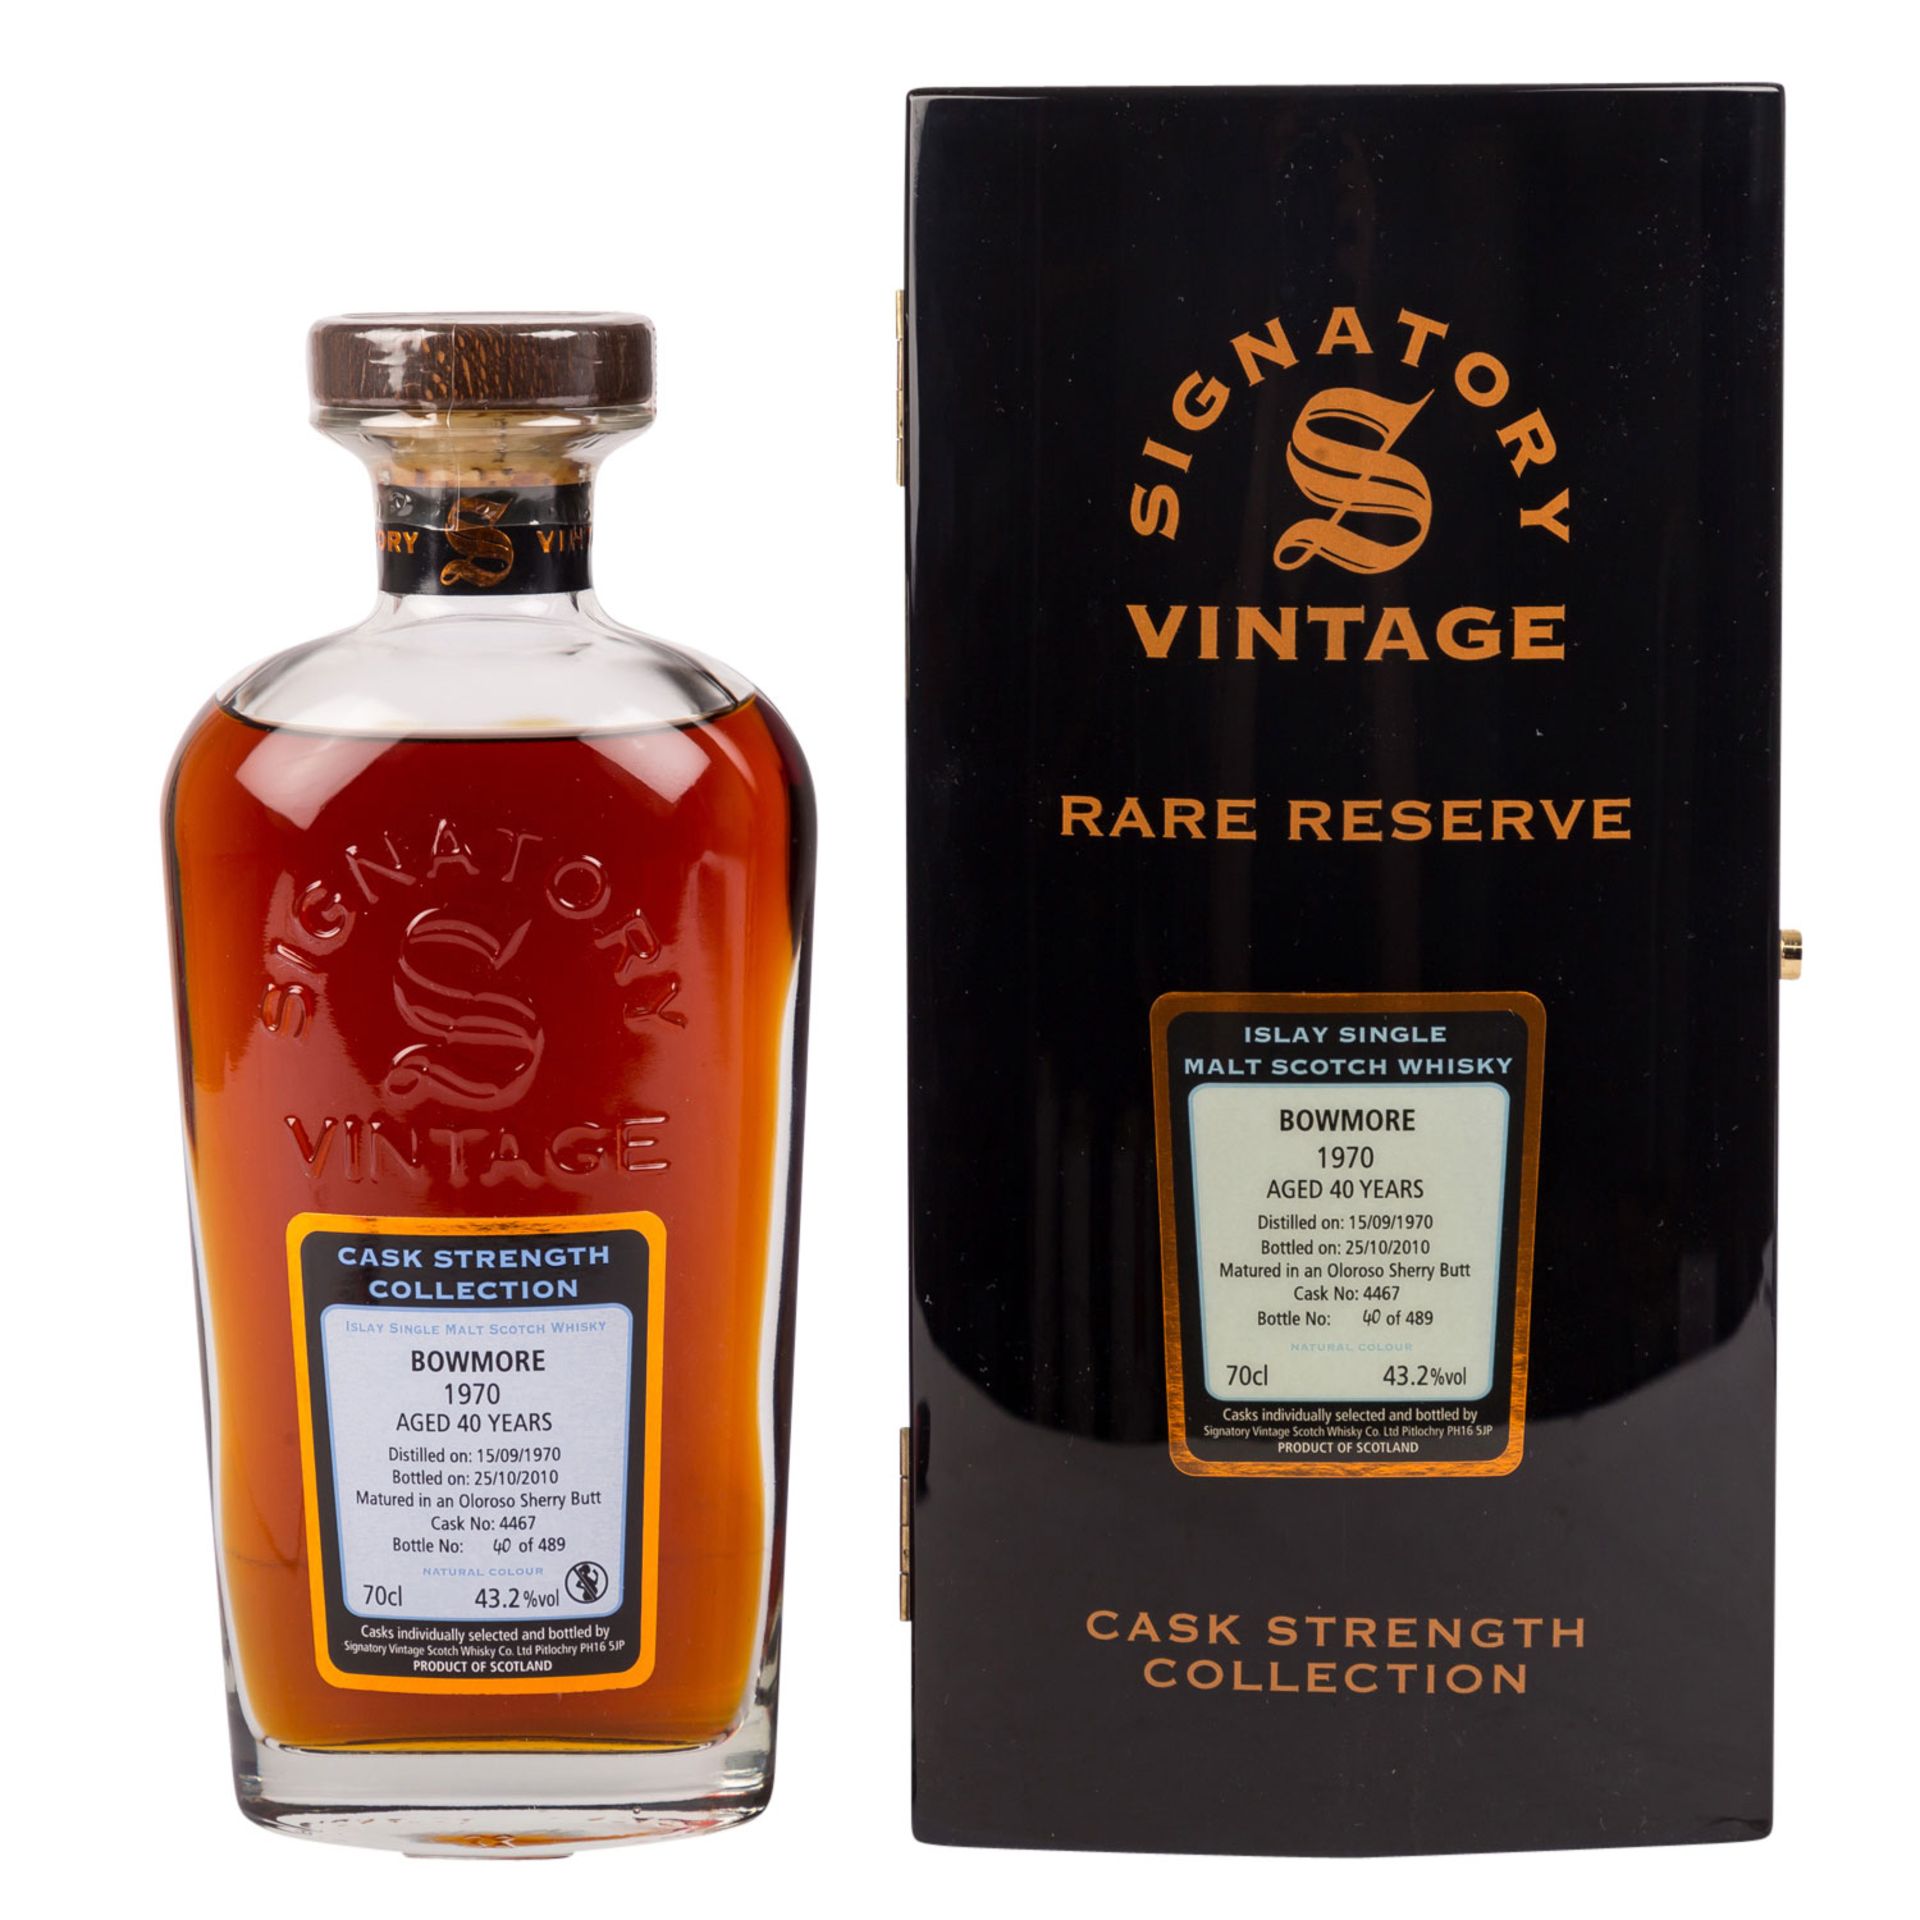 BOWMORE Single Malt Scotch Whisky 'Cask Strenght Collection', 1970, SIGNATORY VINTAGE, 40 years